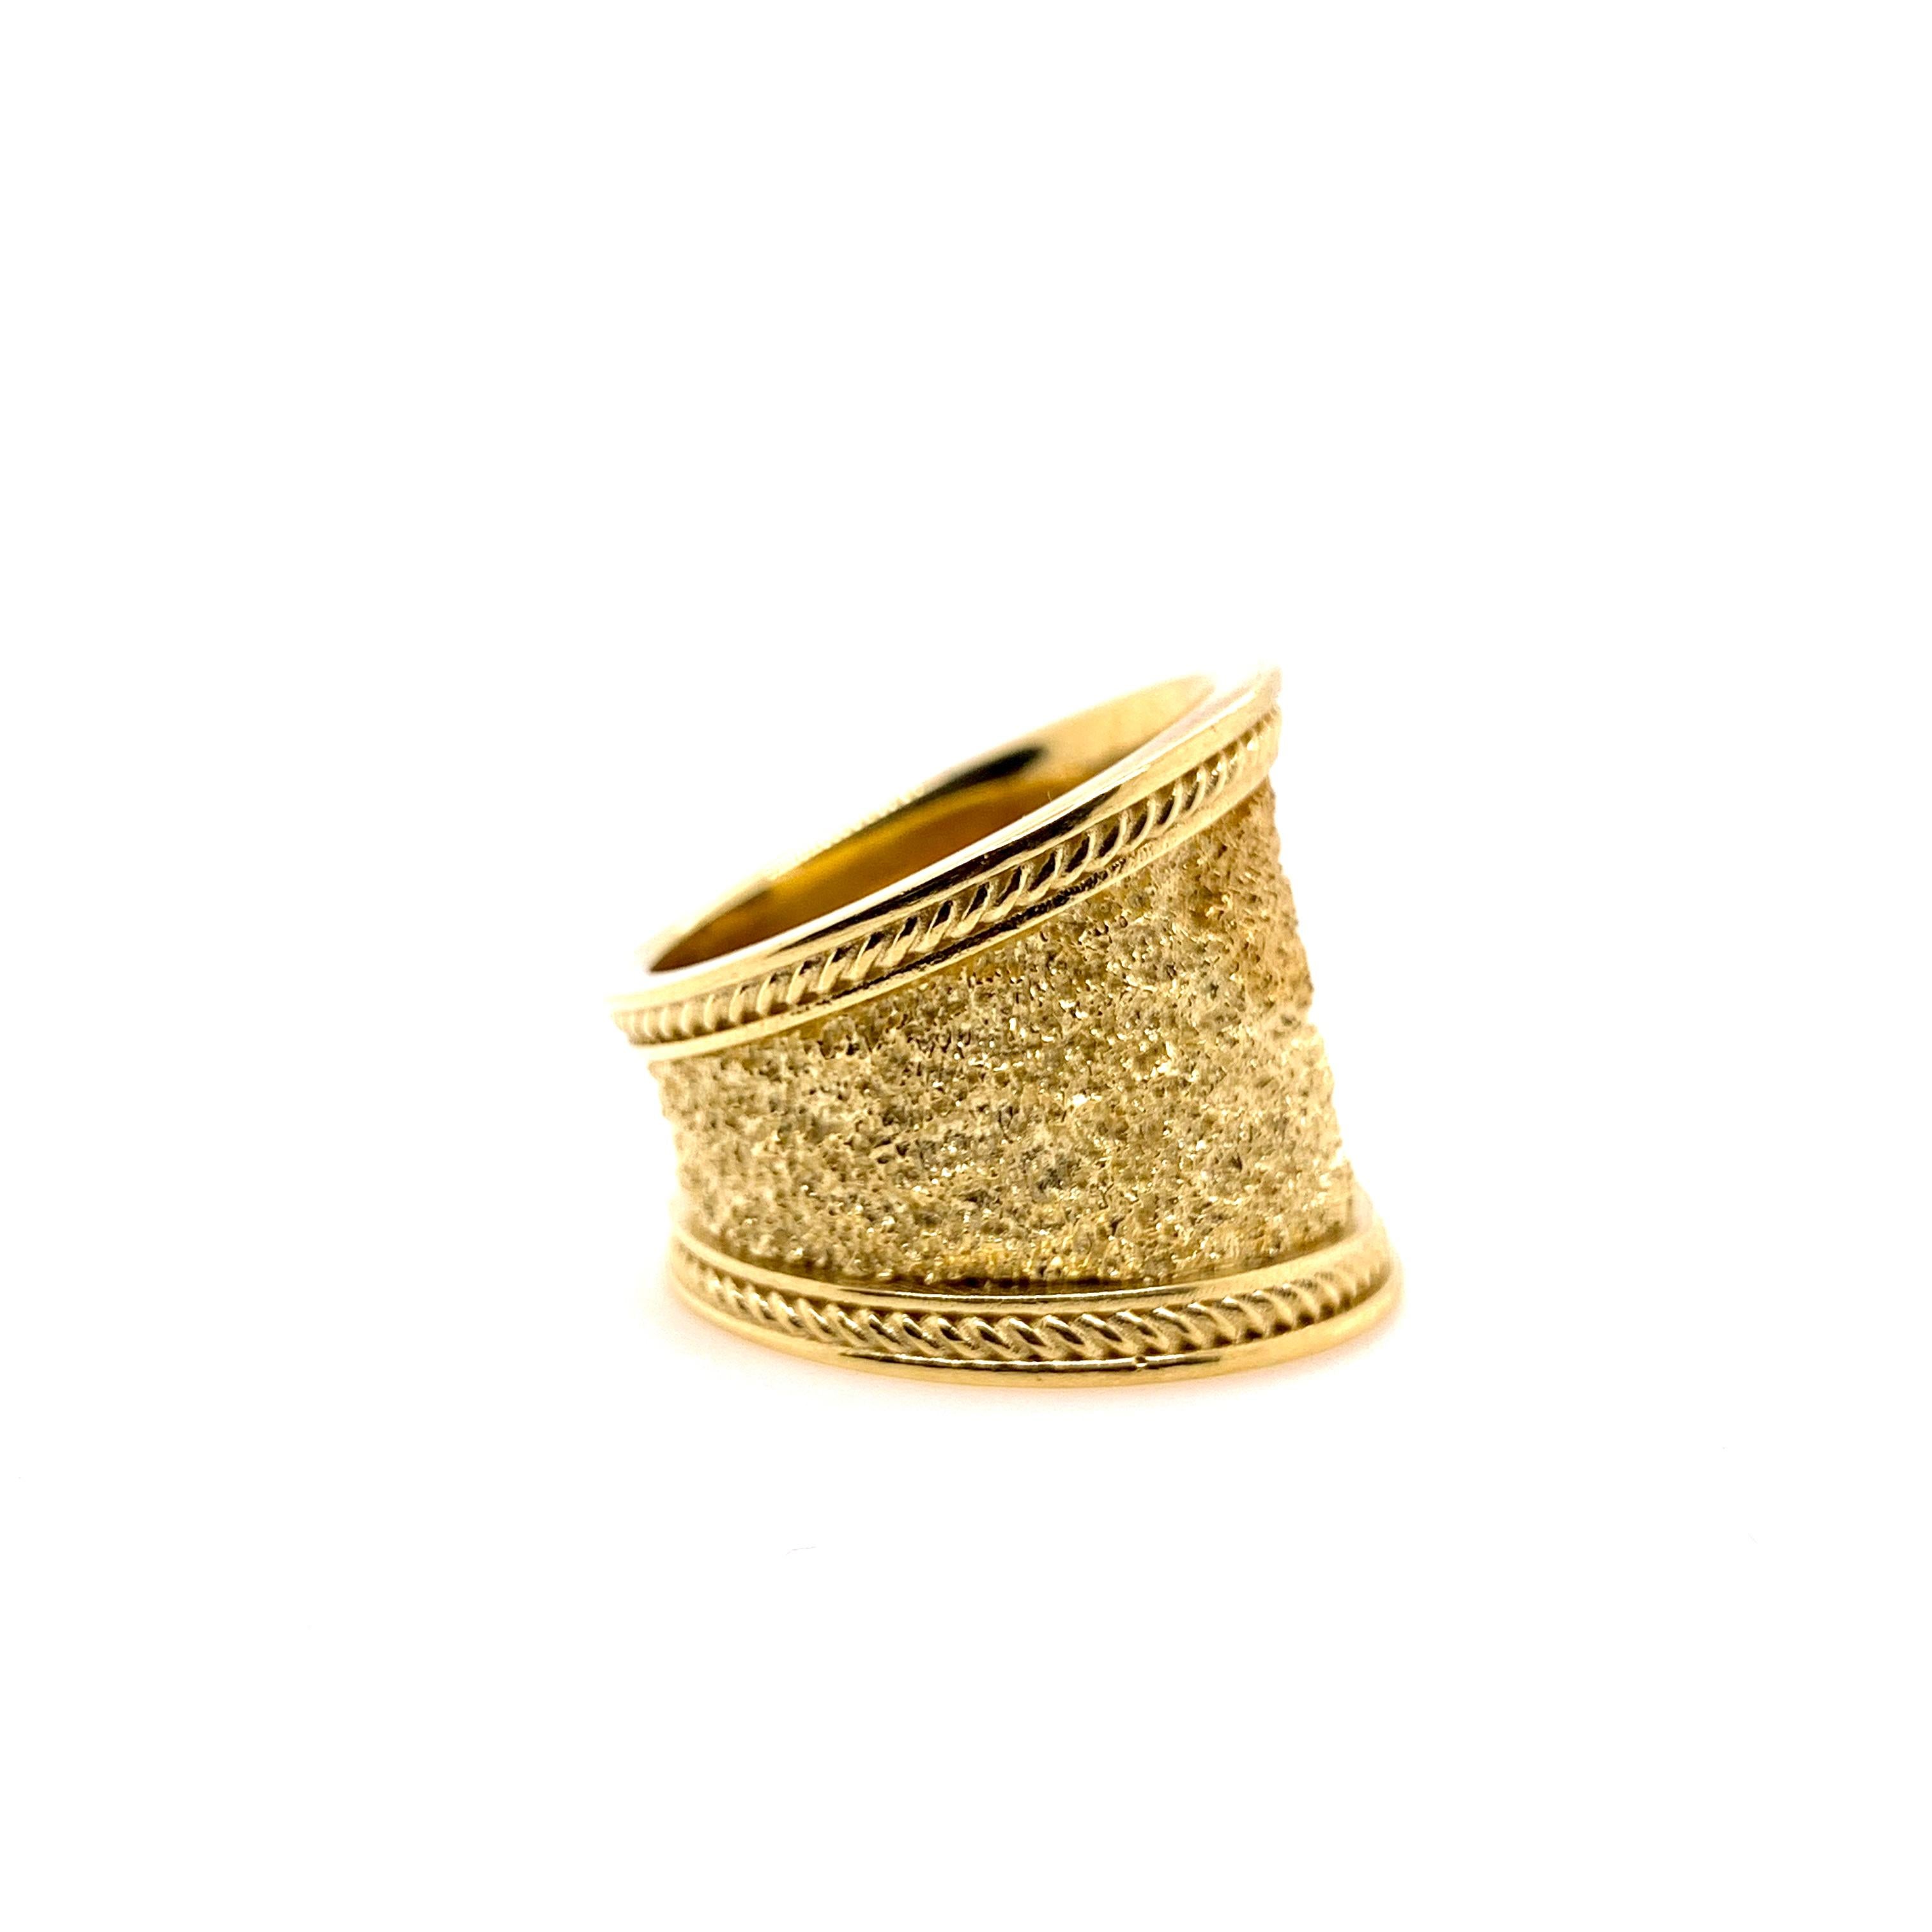 A beautiful textured 18k yellow gold cigar band perfect to be worn casually or formally.  The twisted rope texture on the edges provides a beautiful contrast to the textured center in this yellow gold ring.  The inside is a high shine finish with a